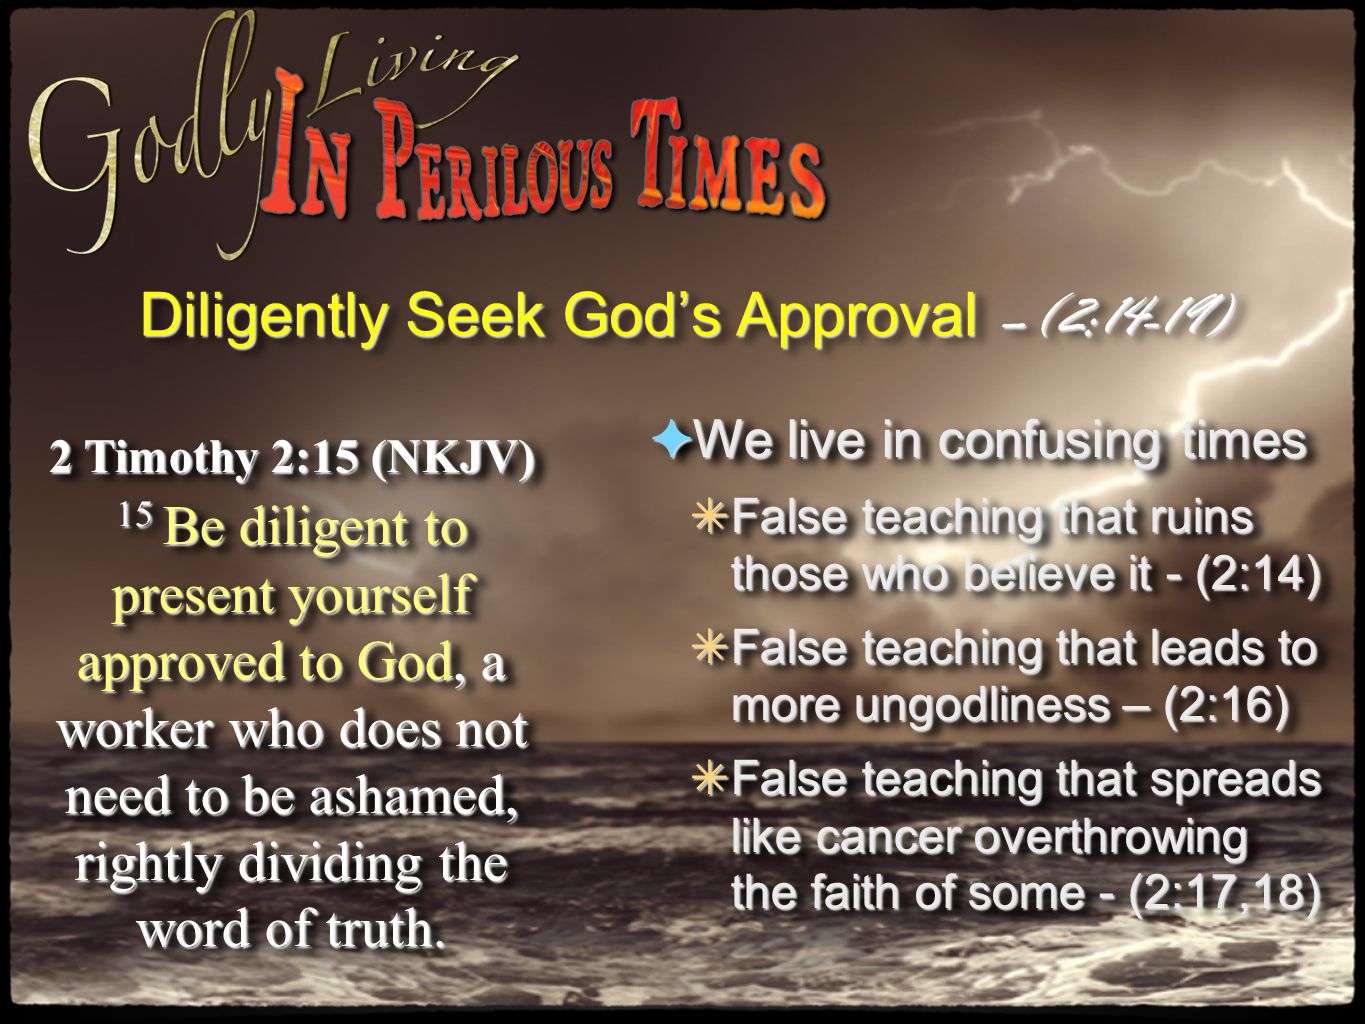 Diligently Seek God’s Approval –(2:14-19) 2 Timothy 2:15 (NKJV) 15 Be diligent to present yourself approved to God, a worker who does not need to be ashamed, rightly dividing the word of truth.